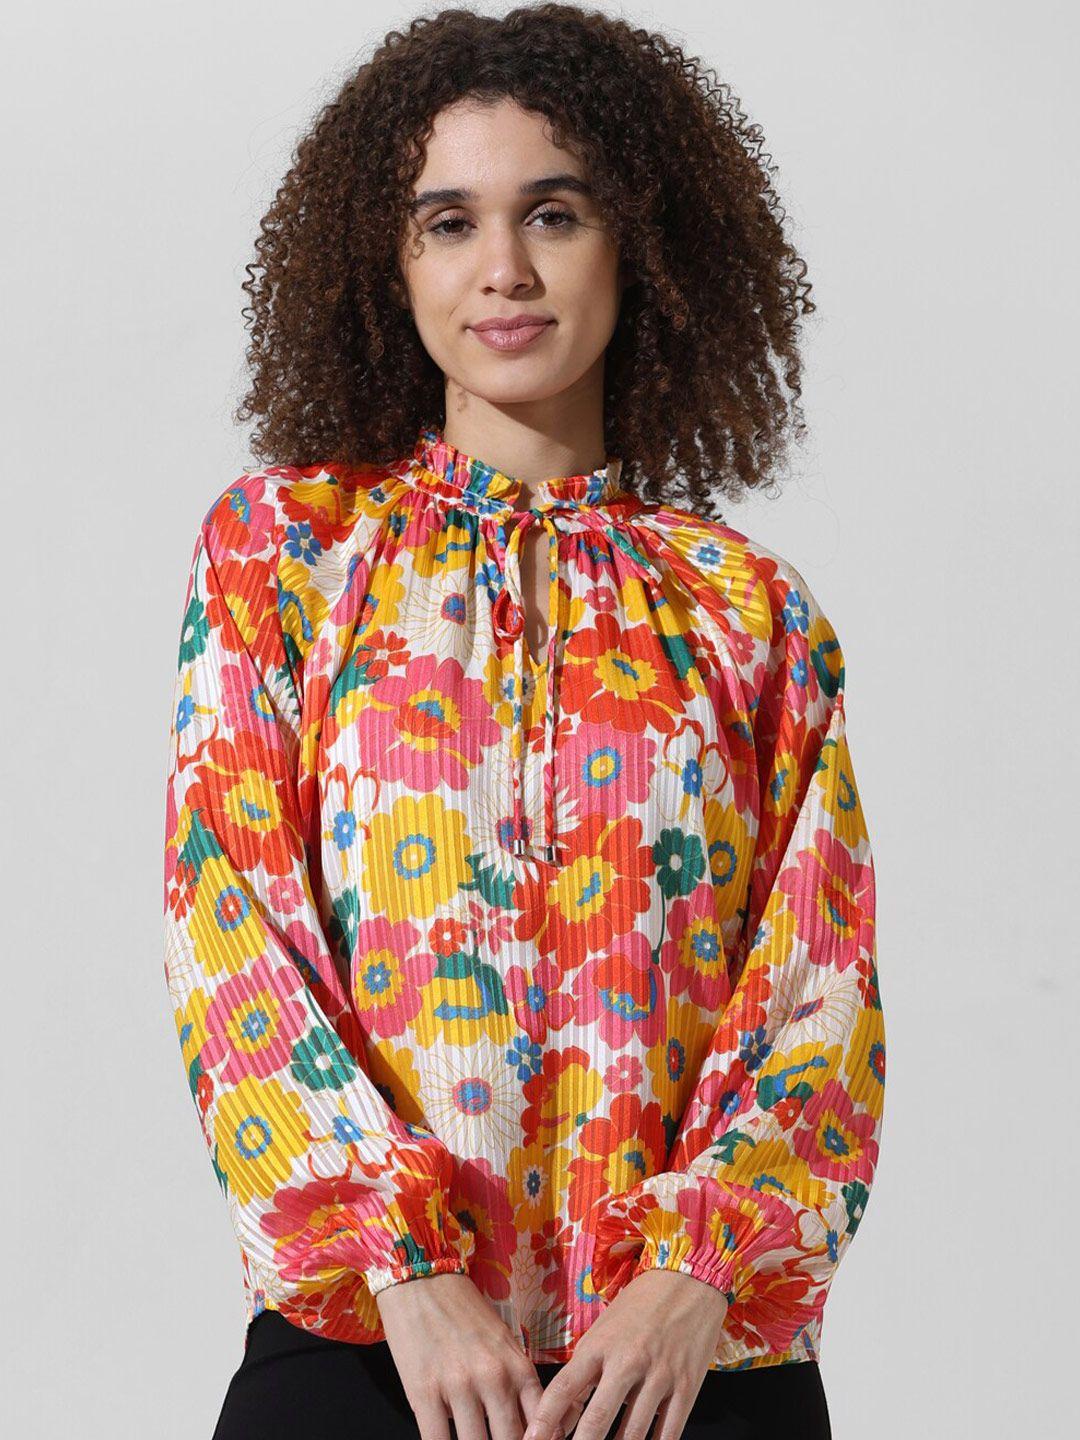 ONLY Self Design Floral Printed Tie Up Neck Long Sleeves Top